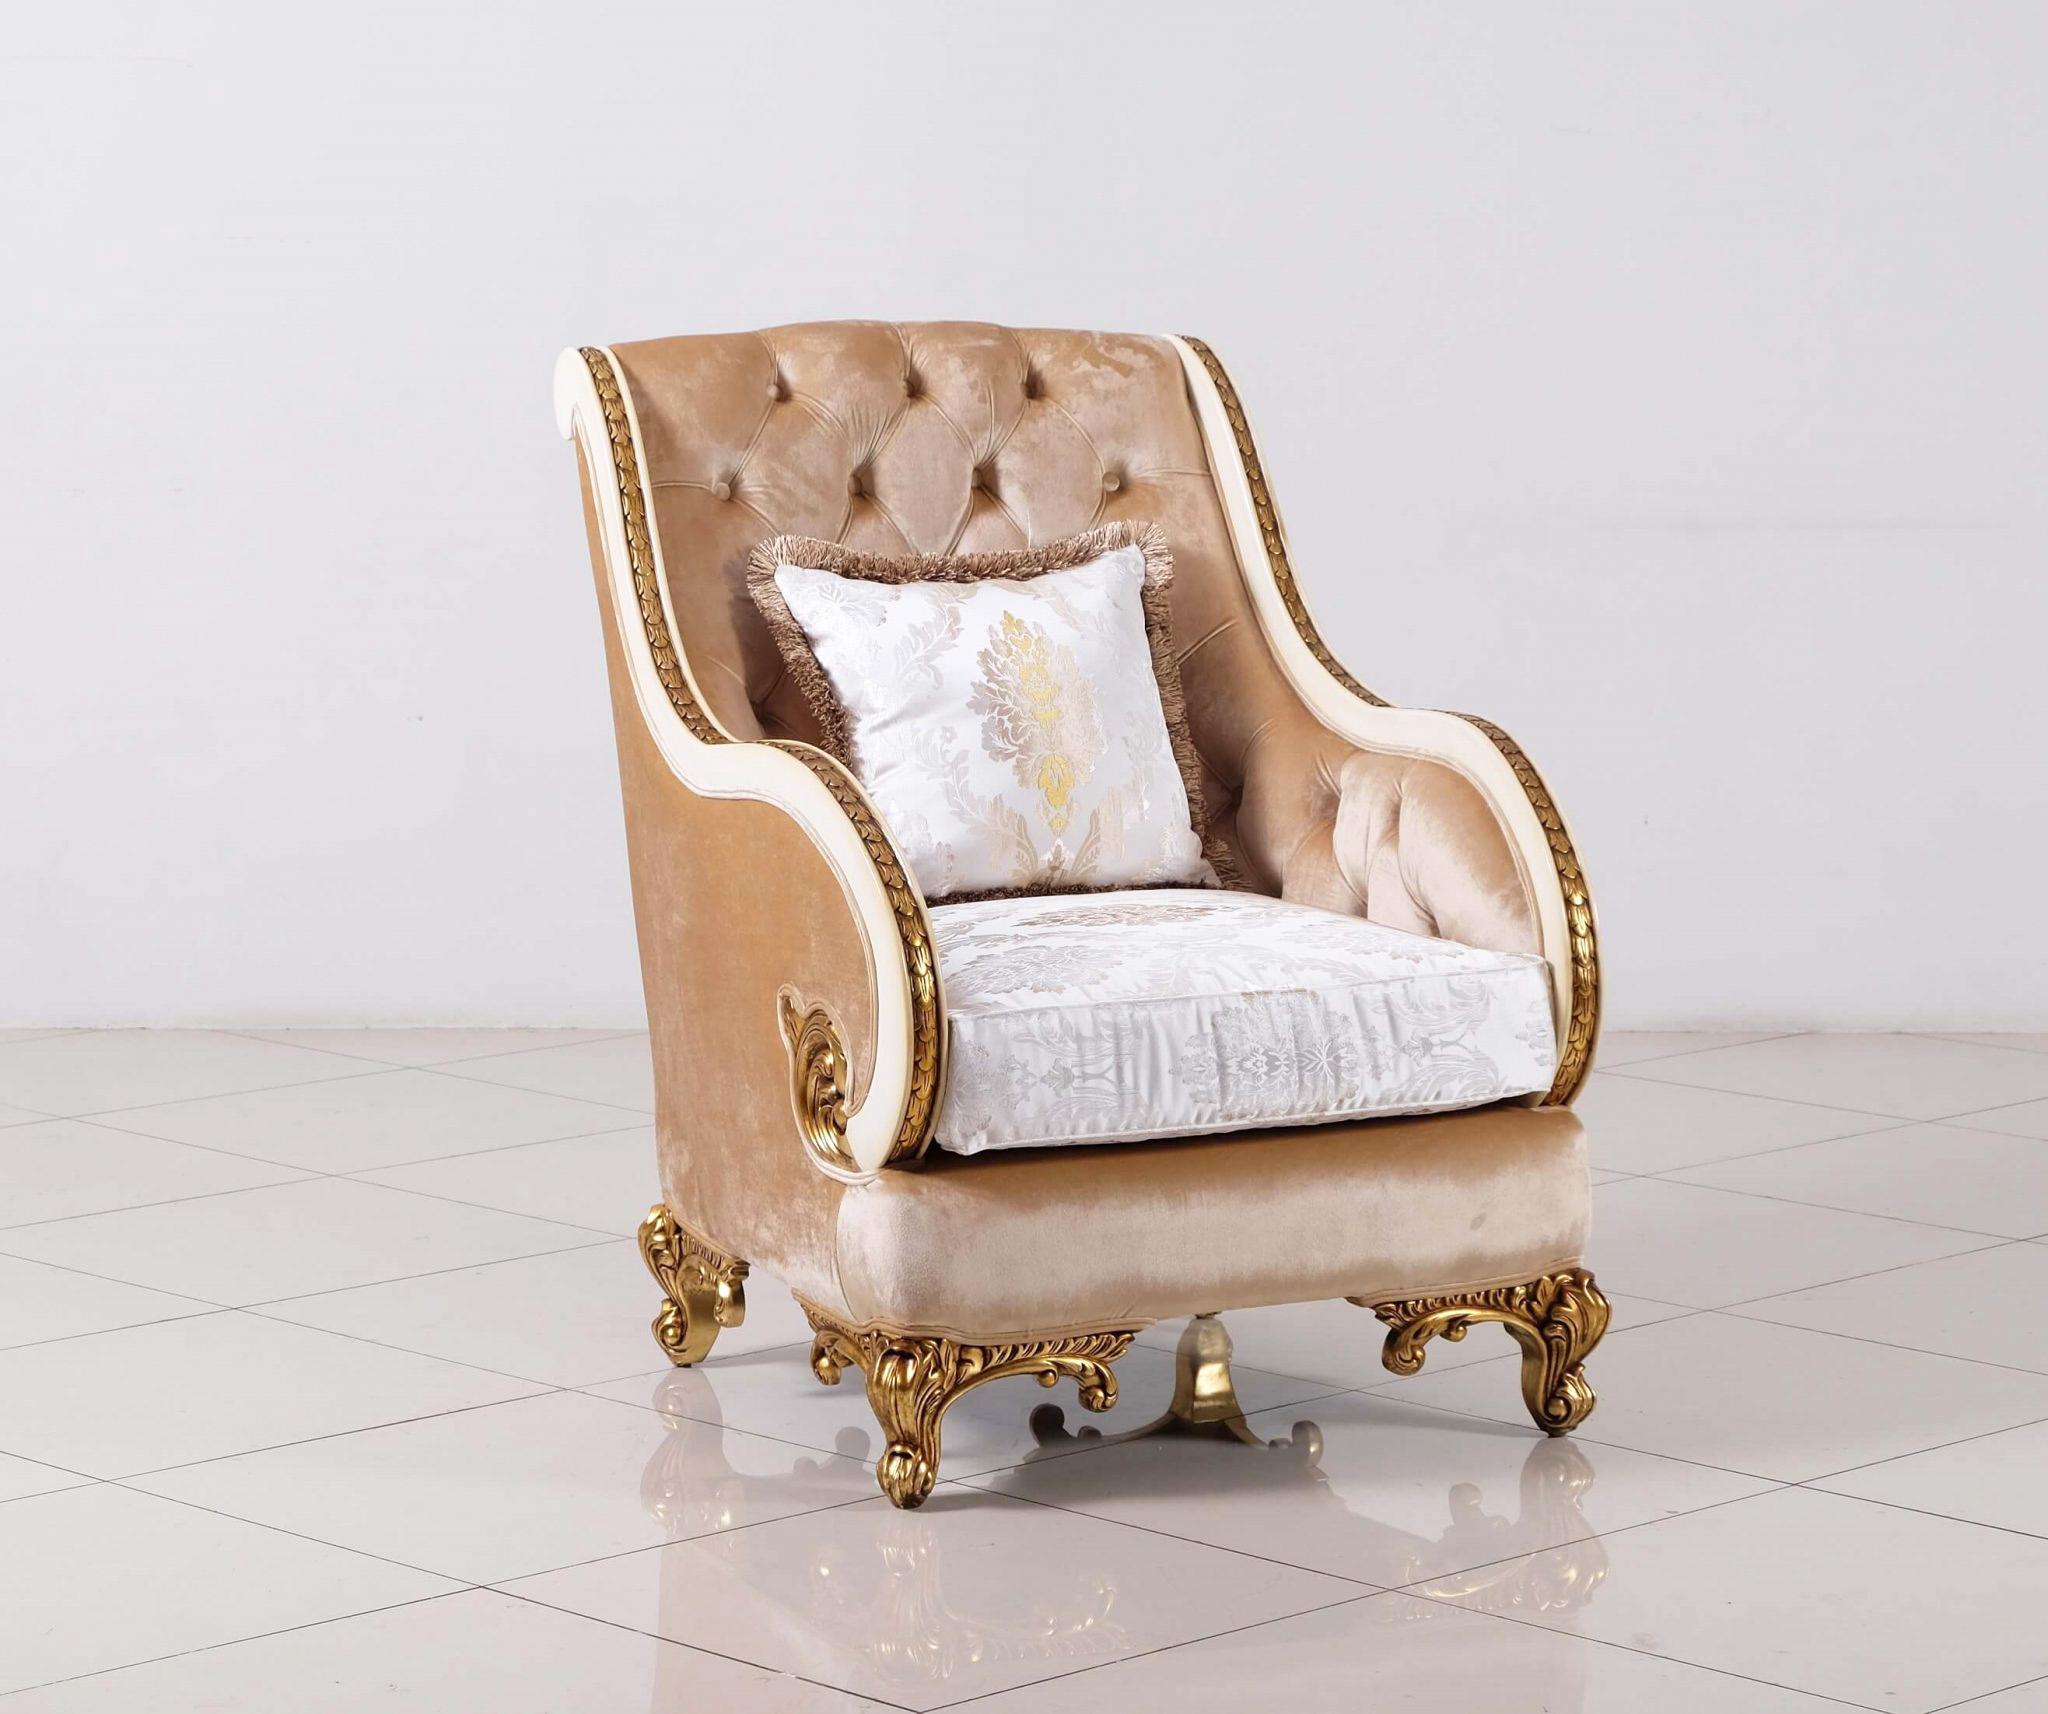 Classic, Traditional Arm Chair ROSABELLA 36031-C in Antique, Gold, Beige Fabric